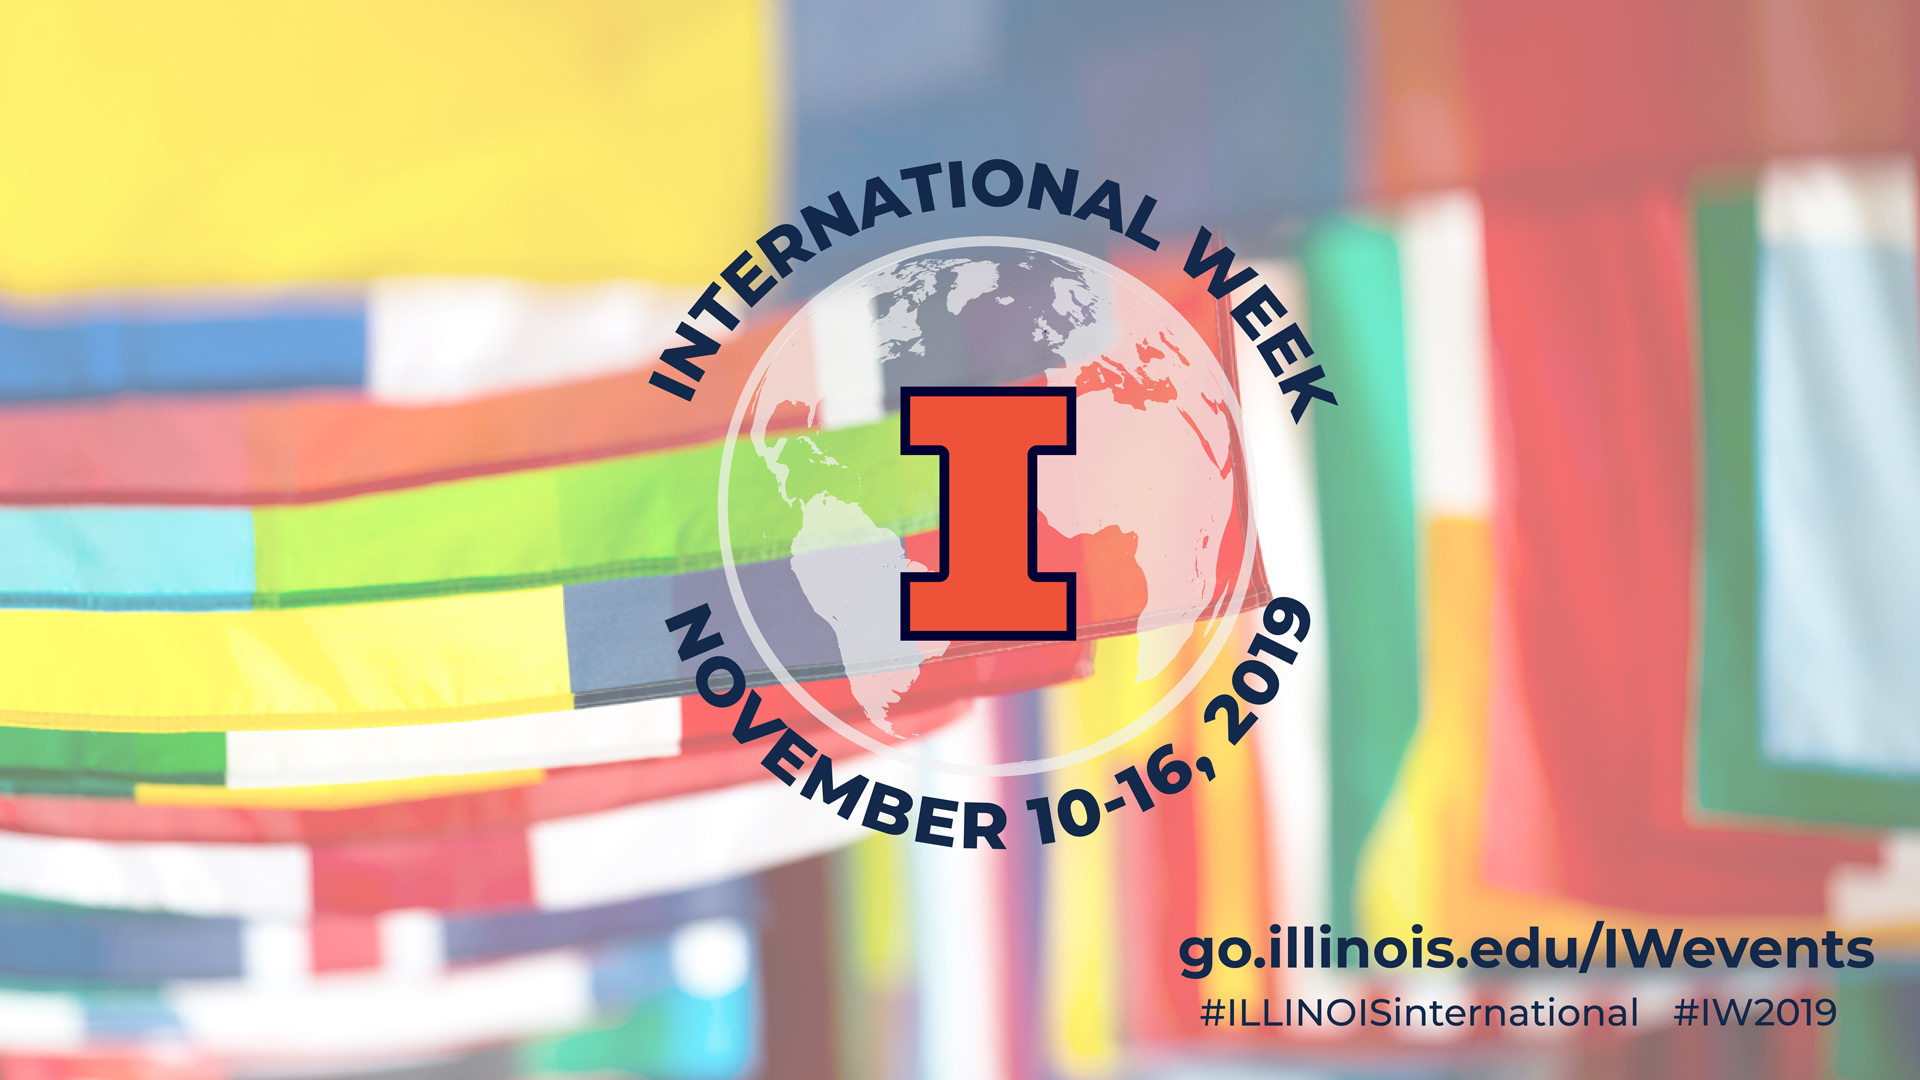 Illini I infront of globe outline with text: International Week November 10-16, 2019